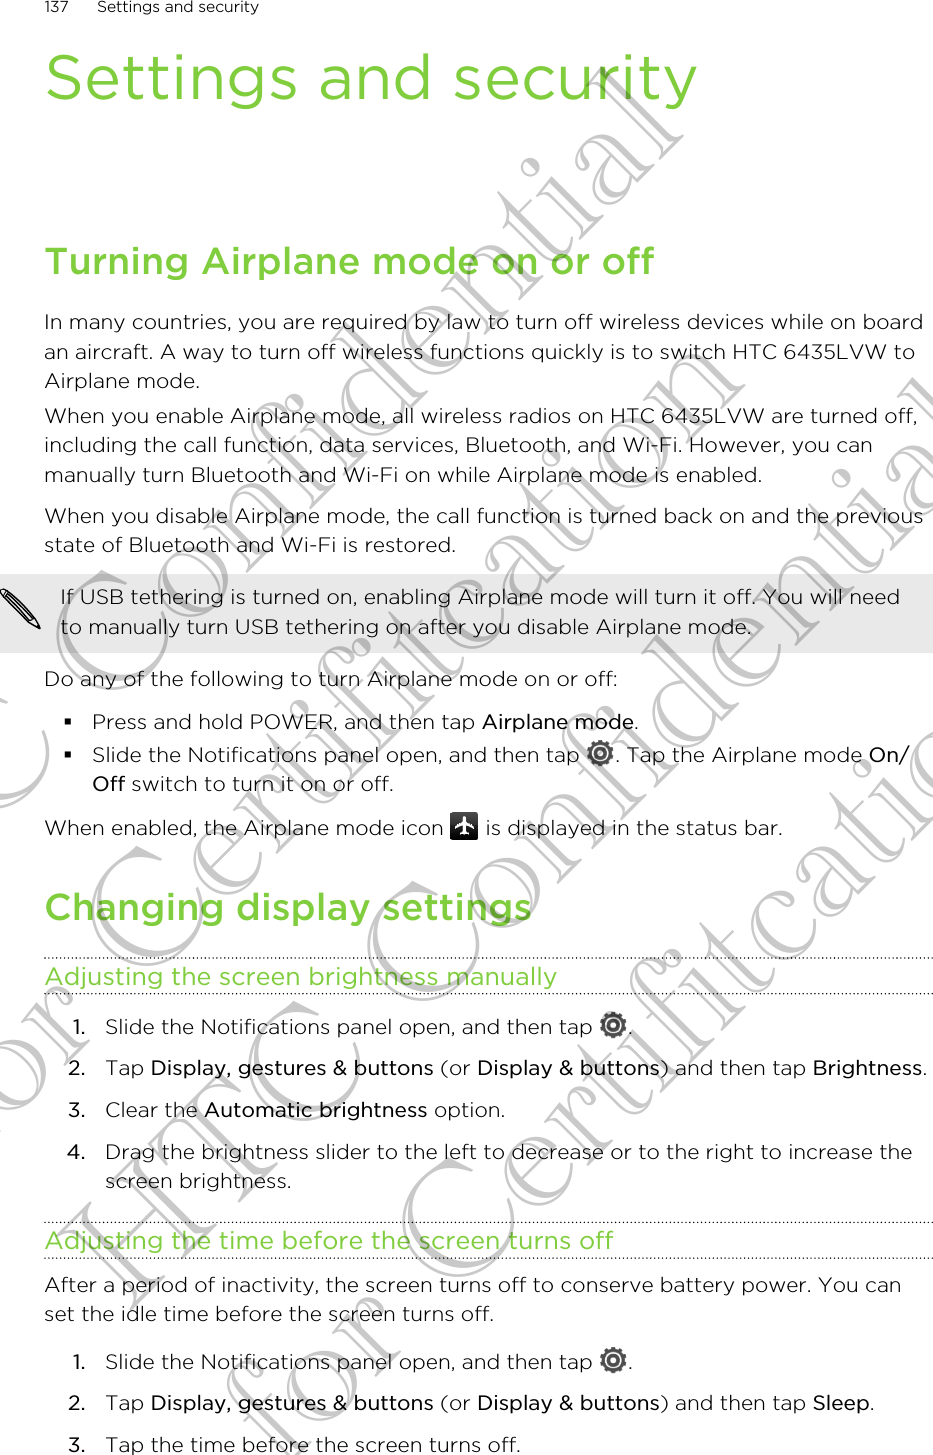 Settings and securityTurning Airplane mode on or offIn many countries, you are required by law to turn off wireless devices while on boardan aircraft. A way to turn off wireless functions quickly is to switch HTC 6435LVW toAirplane mode.When you enable Airplane mode, all wireless radios on HTC 6435LVW are turned off,including the call function, data services, Bluetooth, and Wi-Fi. However, you canmanually turn Bluetooth and Wi-Fi on while Airplane mode is enabled.When you disable Airplane mode, the call function is turned back on and the previousstate of Bluetooth and Wi-Fi is restored.If USB tethering is turned on, enabling Airplane mode will turn it off. You will needto manually turn USB tethering on after you disable Airplane mode.Do any of the following to turn Airplane mode on or off:§Press and hold POWER, and then tap Airplane mode.§Slide the Notifications panel open, and then tap  . Tap the Airplane mode On/Off switch to turn it on or off.When enabled, the Airplane mode icon   is displayed in the status bar.Changing display settingsAdjusting the screen brightness manually1. Slide the Notifications panel open, and then tap  .2. Tap Display, gestures &amp; buttons (or Display &amp; buttons) and then tap Brightness.3. Clear the Automatic brightness option.4. Drag the brightness slider to the left to decrease or to the right to increase thescreen brightness.Adjusting the time before the screen turns offAfter a period of inactivity, the screen turns off to conserve battery power. You canset the idle time before the screen turns off.1. Slide the Notifications panel open, and then tap  .2. Tap Display, gestures &amp; buttons (or Display &amp; buttons) and then tap Sleep.3. Tap the time before the screen turns off.137 Settings and securityHTC Confidential for Certifitcation HTC Confidential for Certifitcation